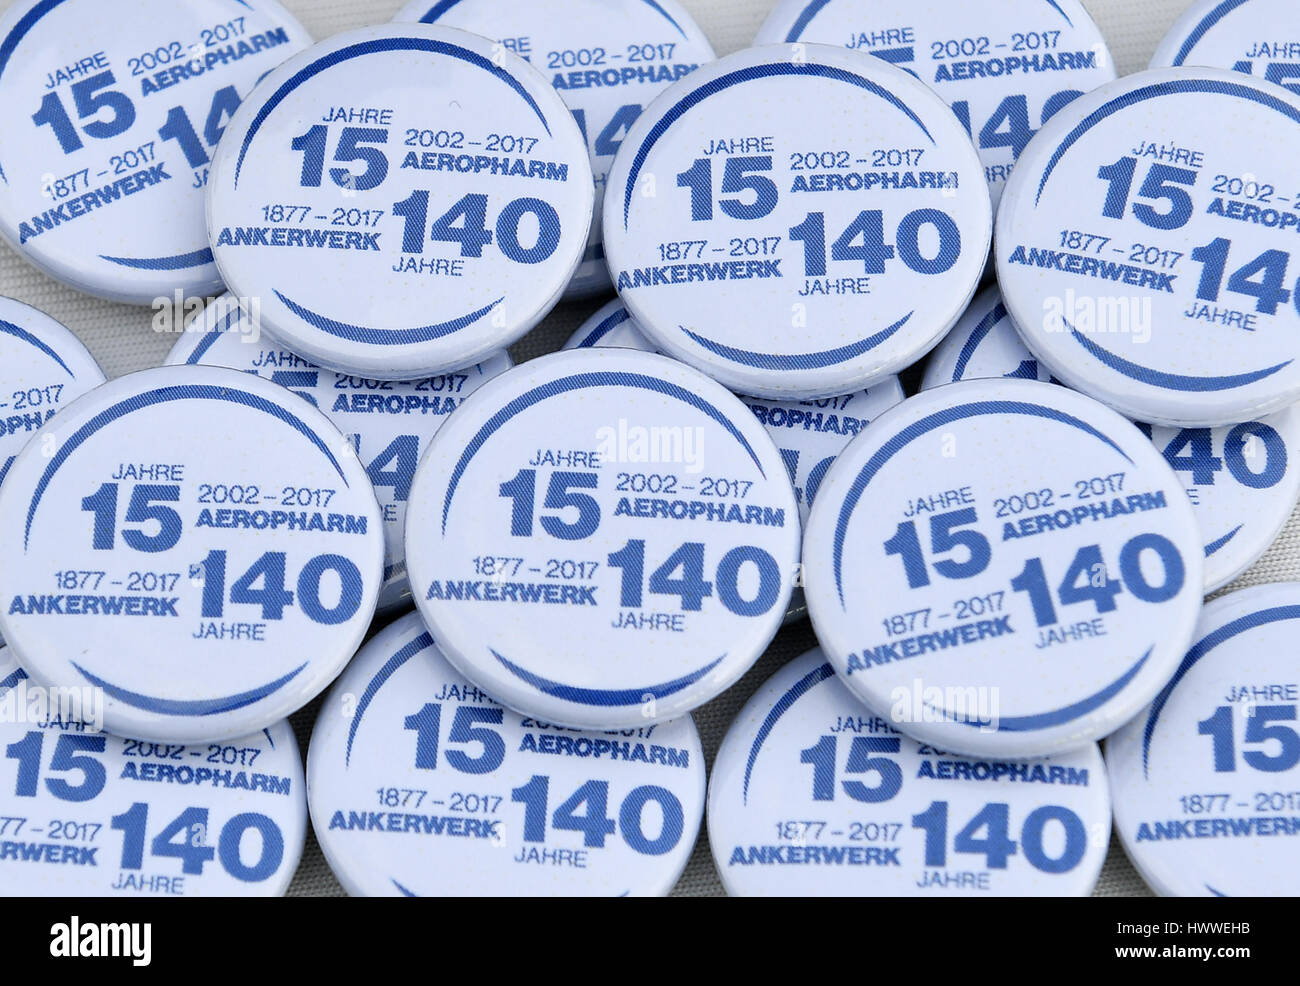 Buttons for the celebration of the anniversary of the Aeropharm GmbH in Rudolstadt, Germany, 15 March 2017. The 15th anniversary of the company was celebrated on the same day. The company, now part of the pharma group Novartis, derrived from the former VEB Ankerwerk and its successor. It produces asthma pharmaceuticals and eye drops that are exported to more than 50 countries. Photo: Martin Schutt/dpa-Zentralbild/dpa Stock Photo